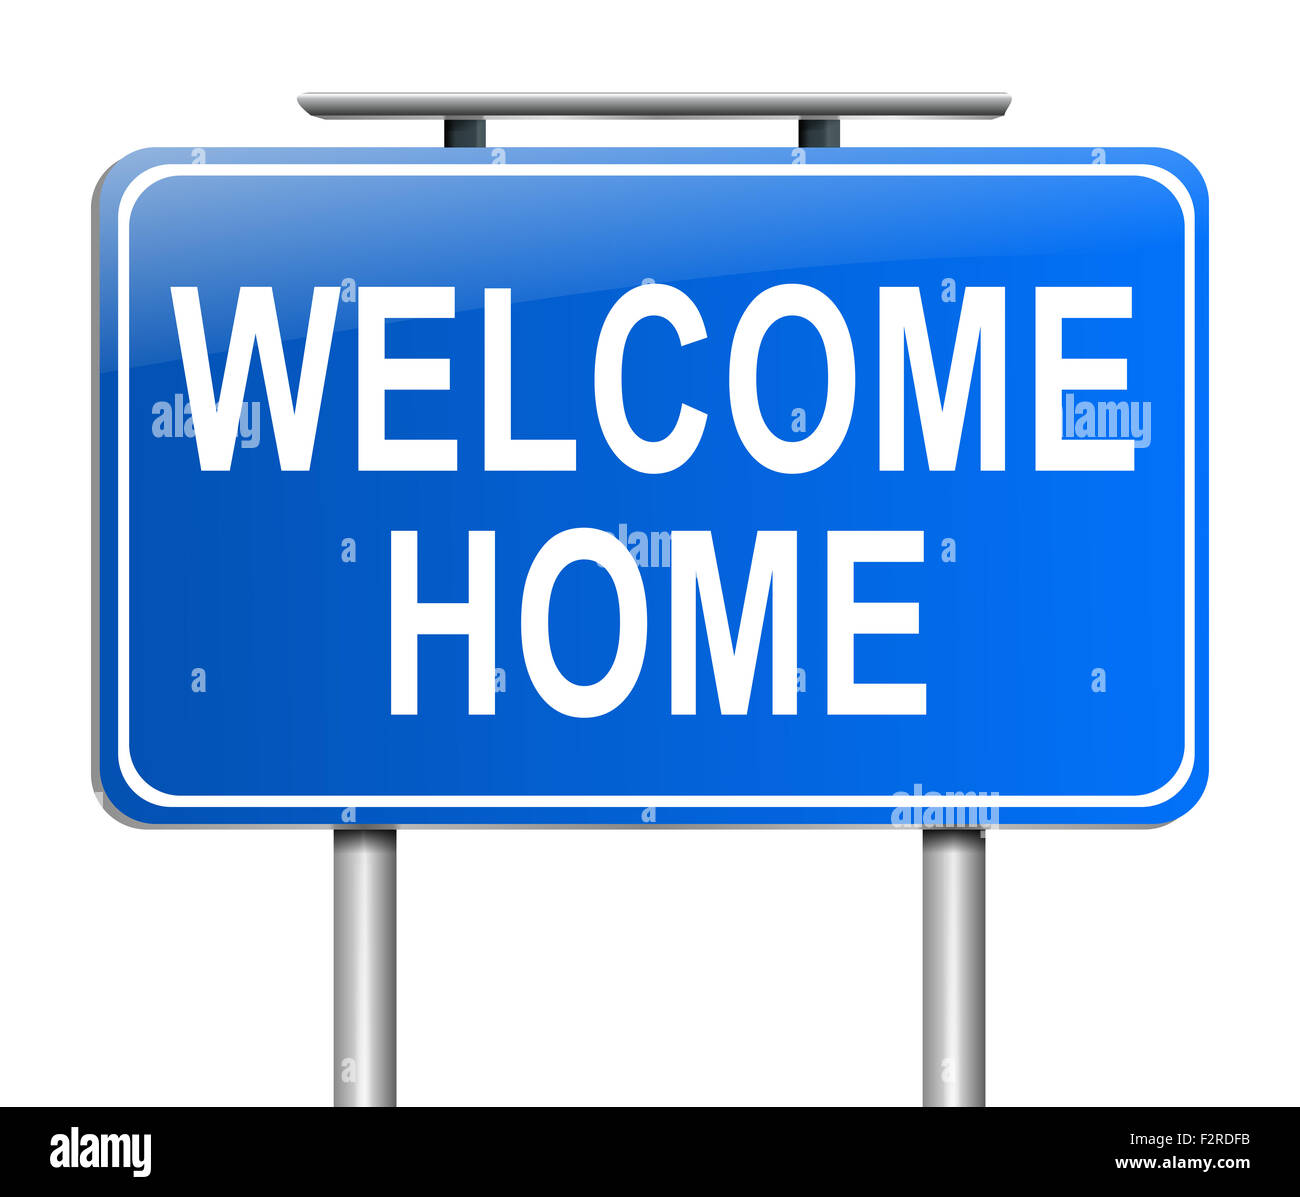 Welcome home concept. Stock Photo